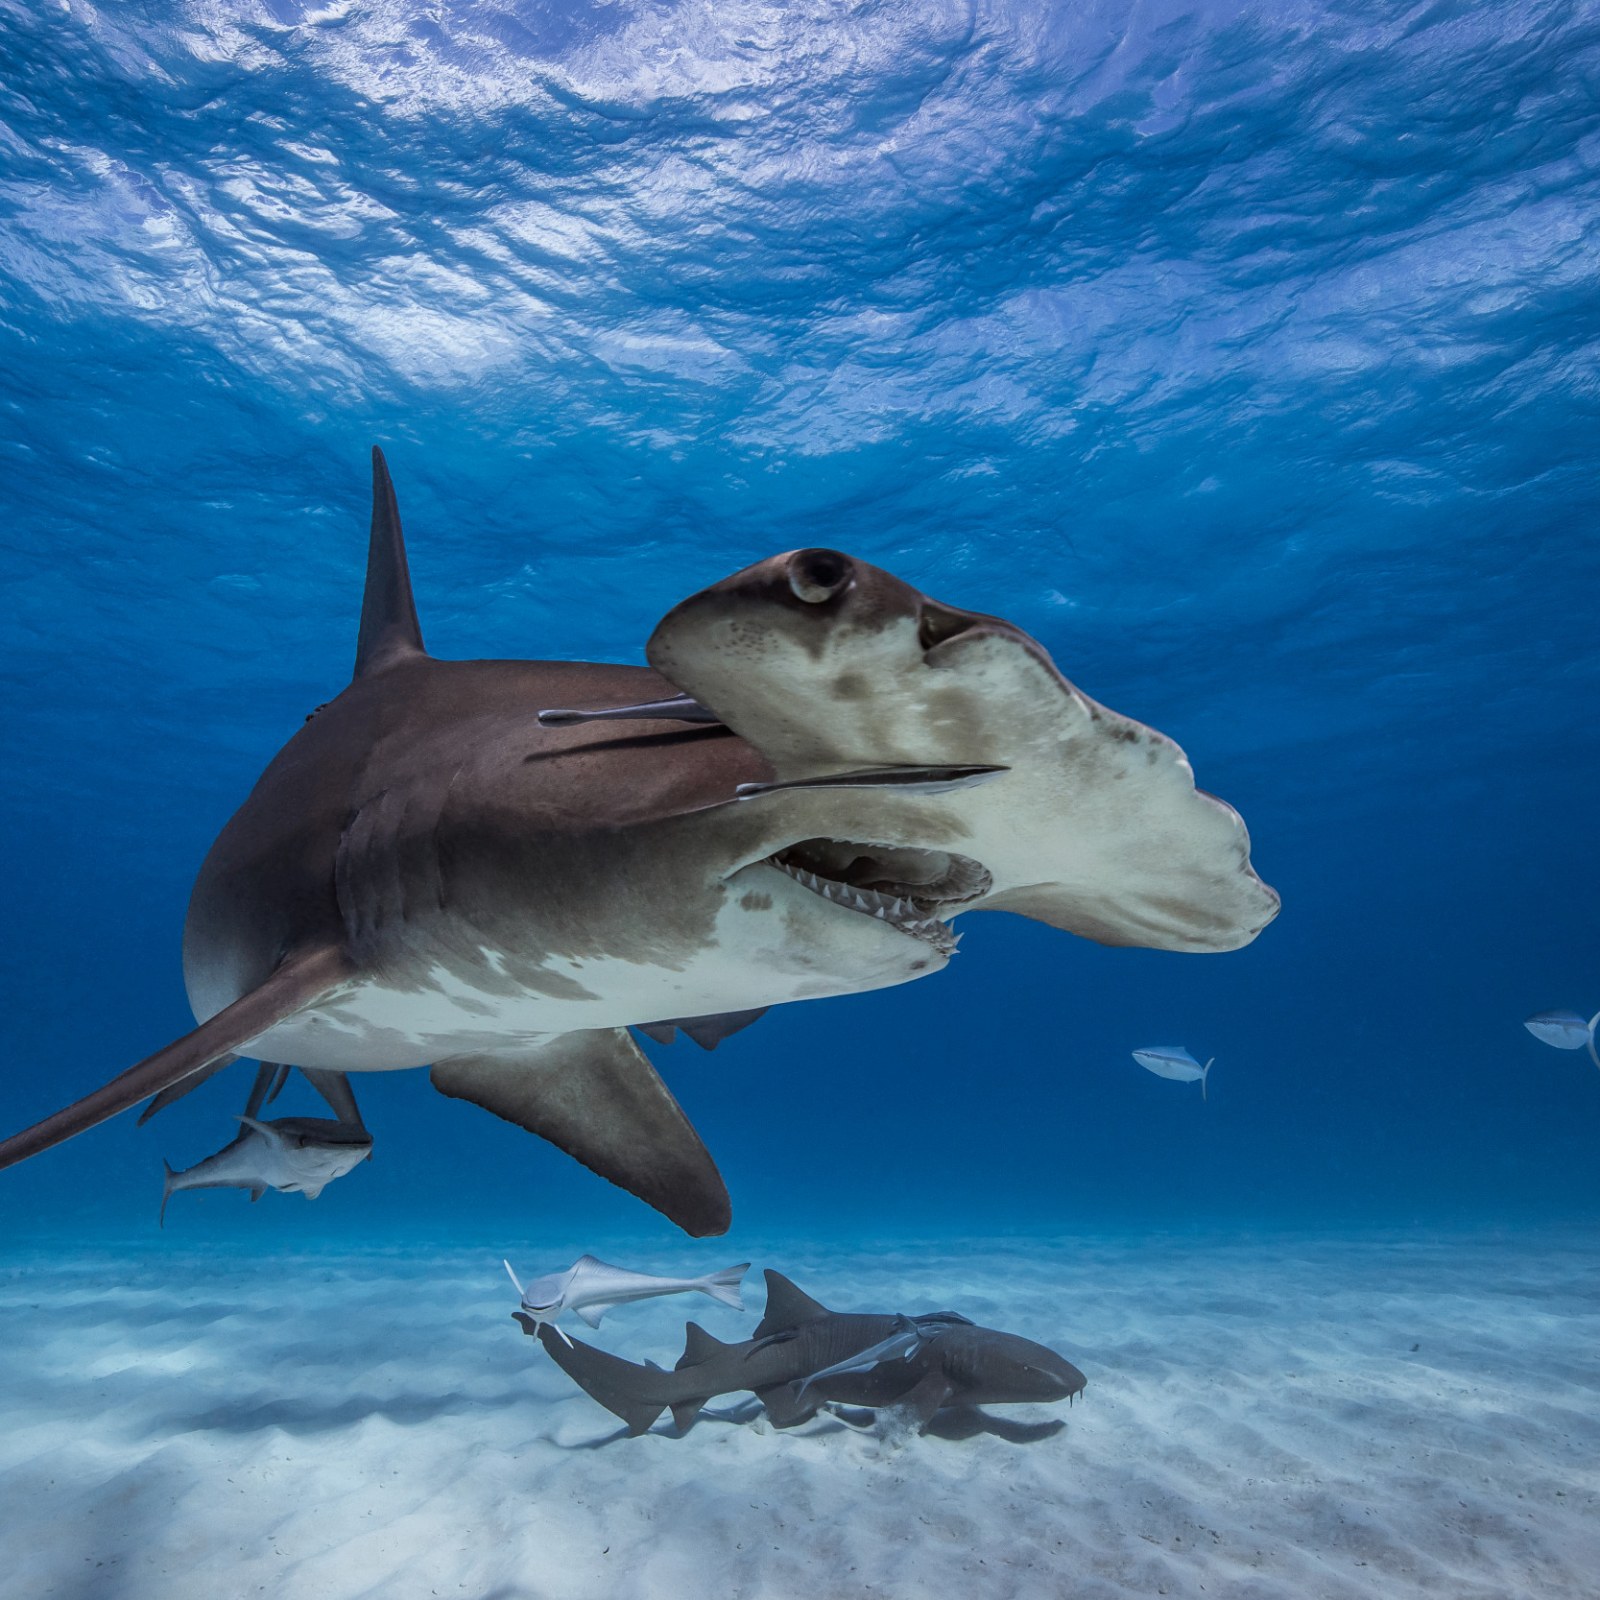 Are Hammerhead Sharks Dangerous and Do They Attack Humans?